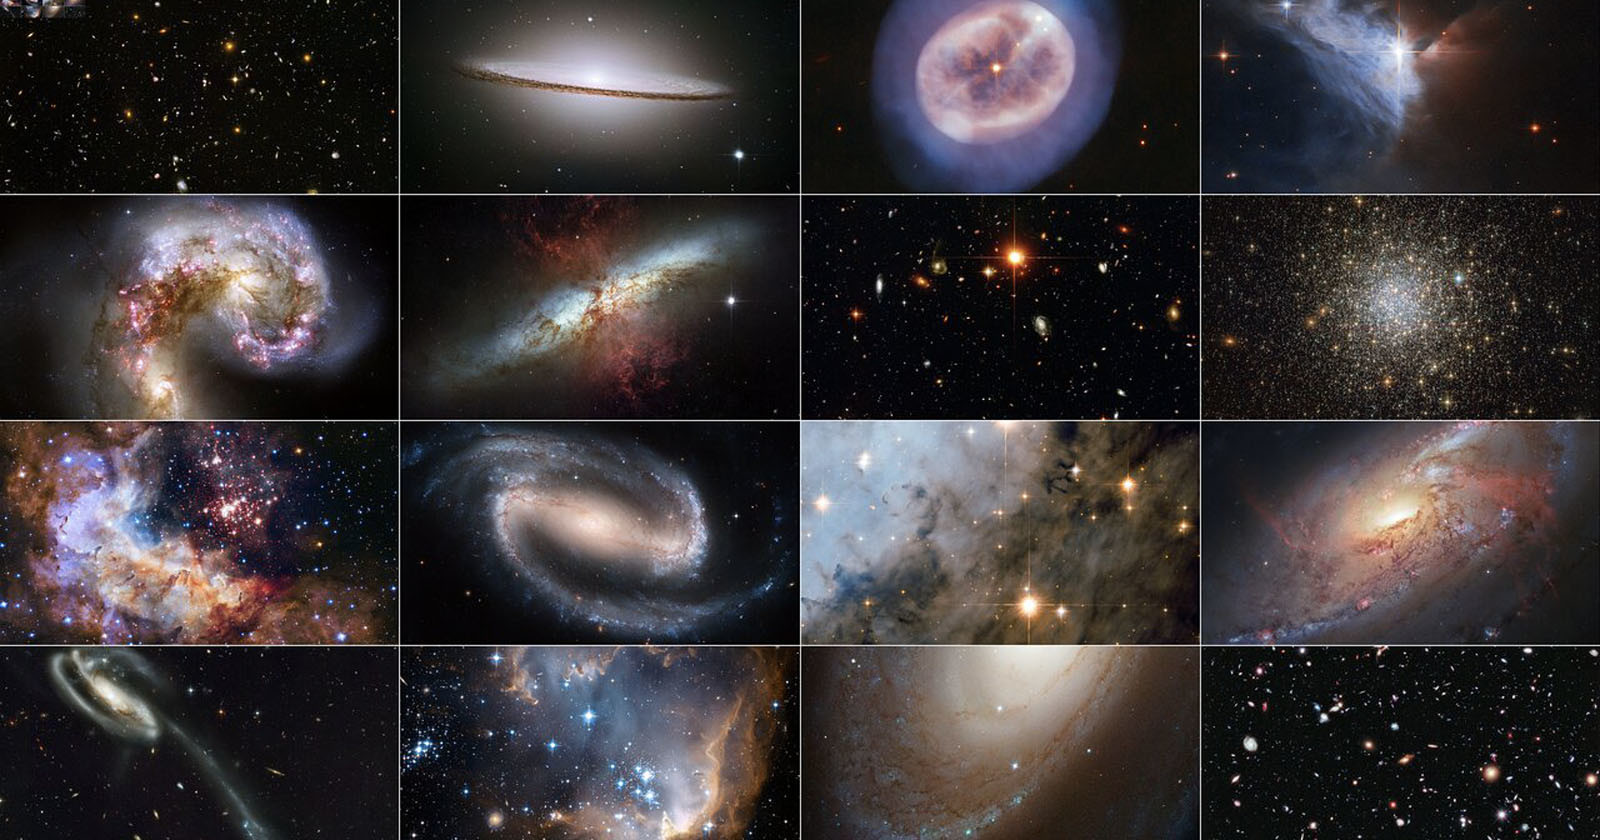  hubble most used camera celebrates years incredible discoveries 